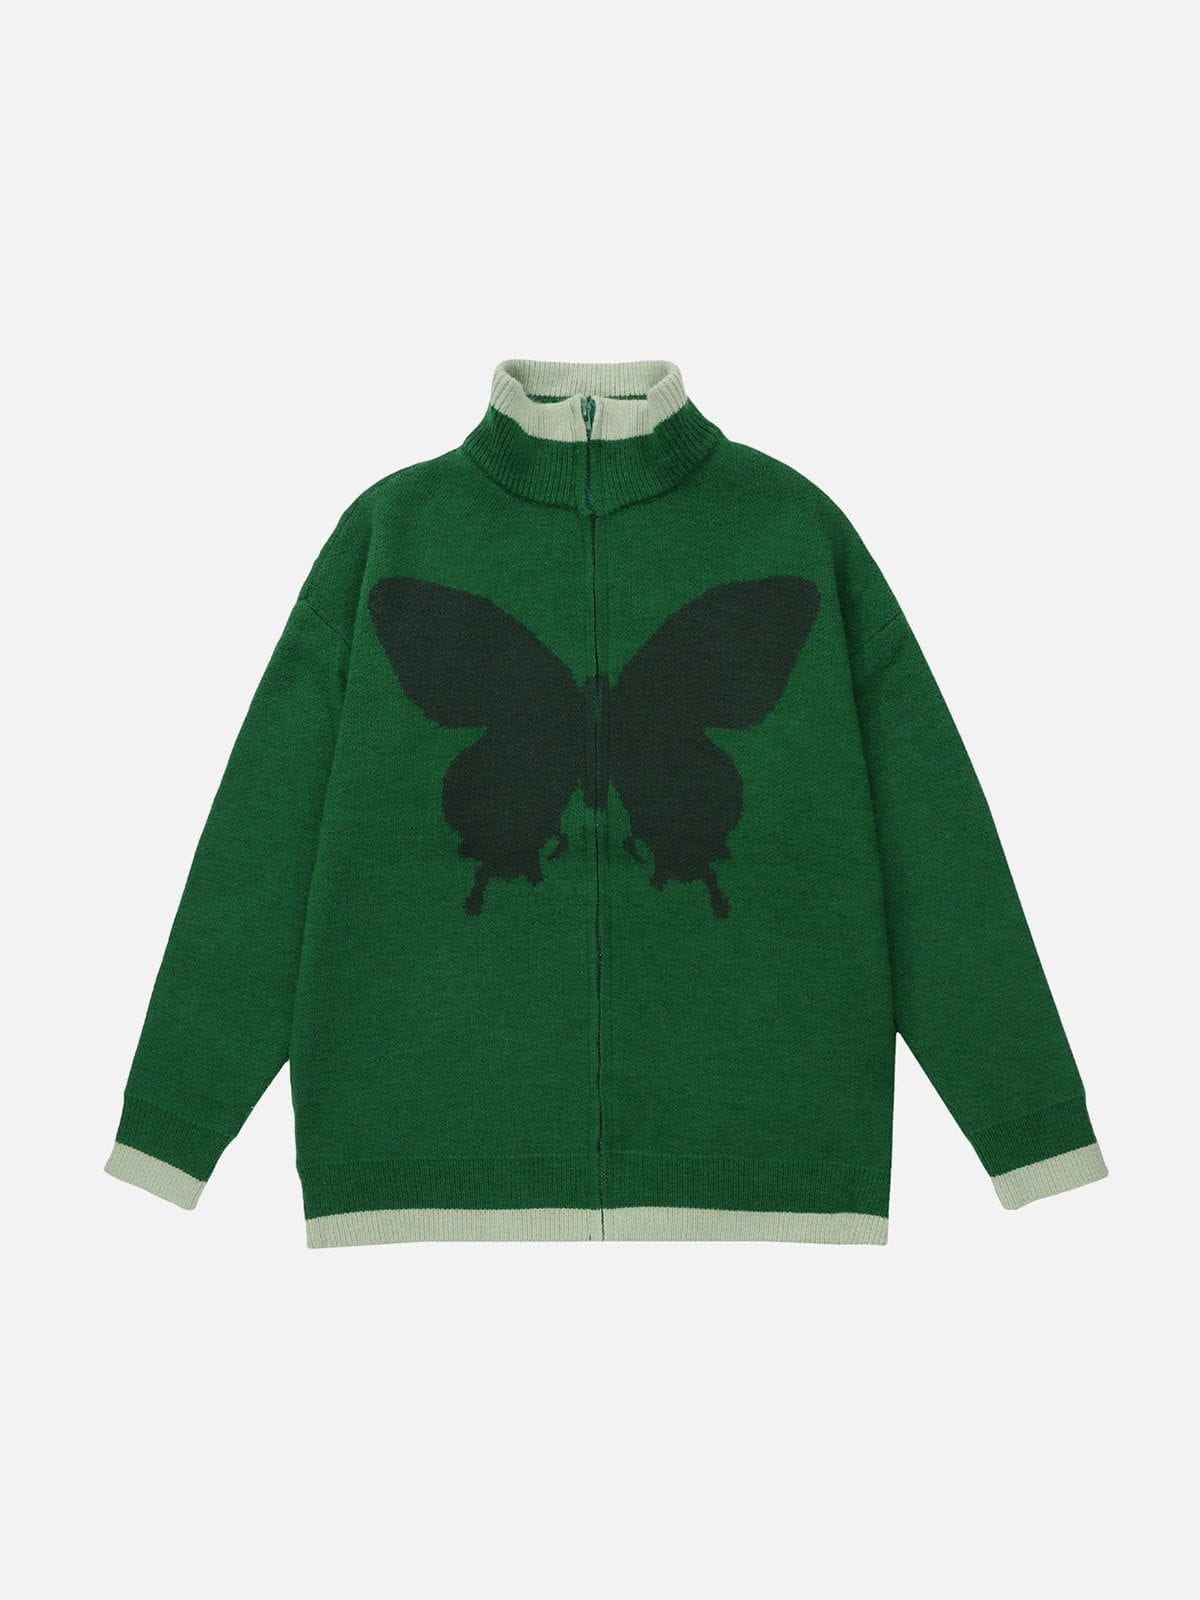 Sneakerland® - Butterfly Embroidery Cardigan